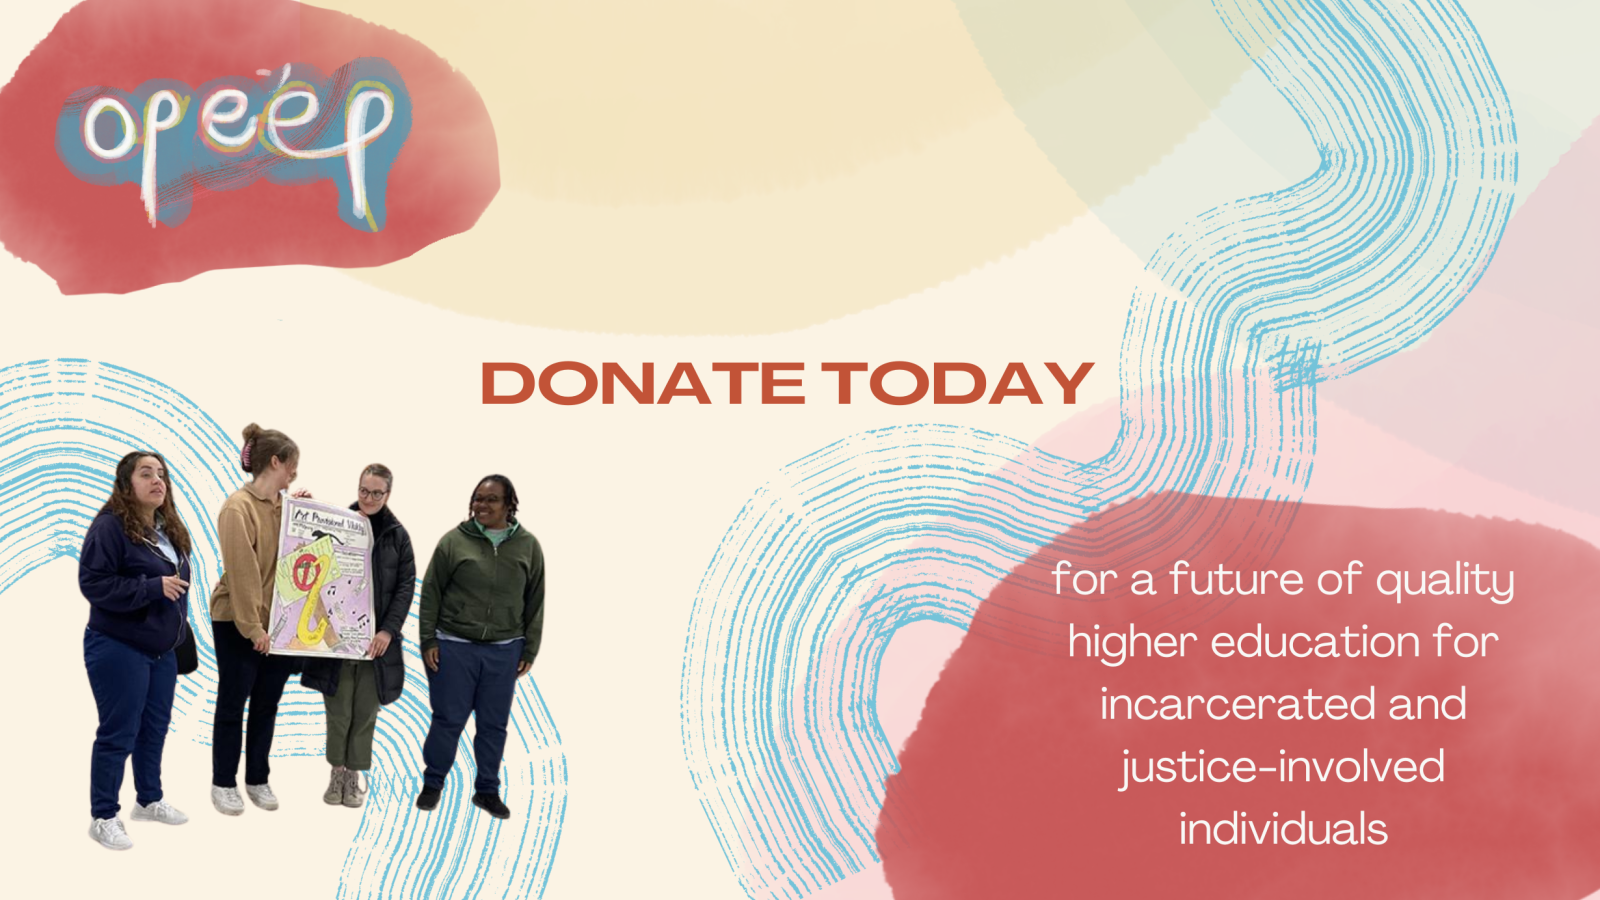 donate today for a future of quality higher education for incarcerated and justice-involved individuals